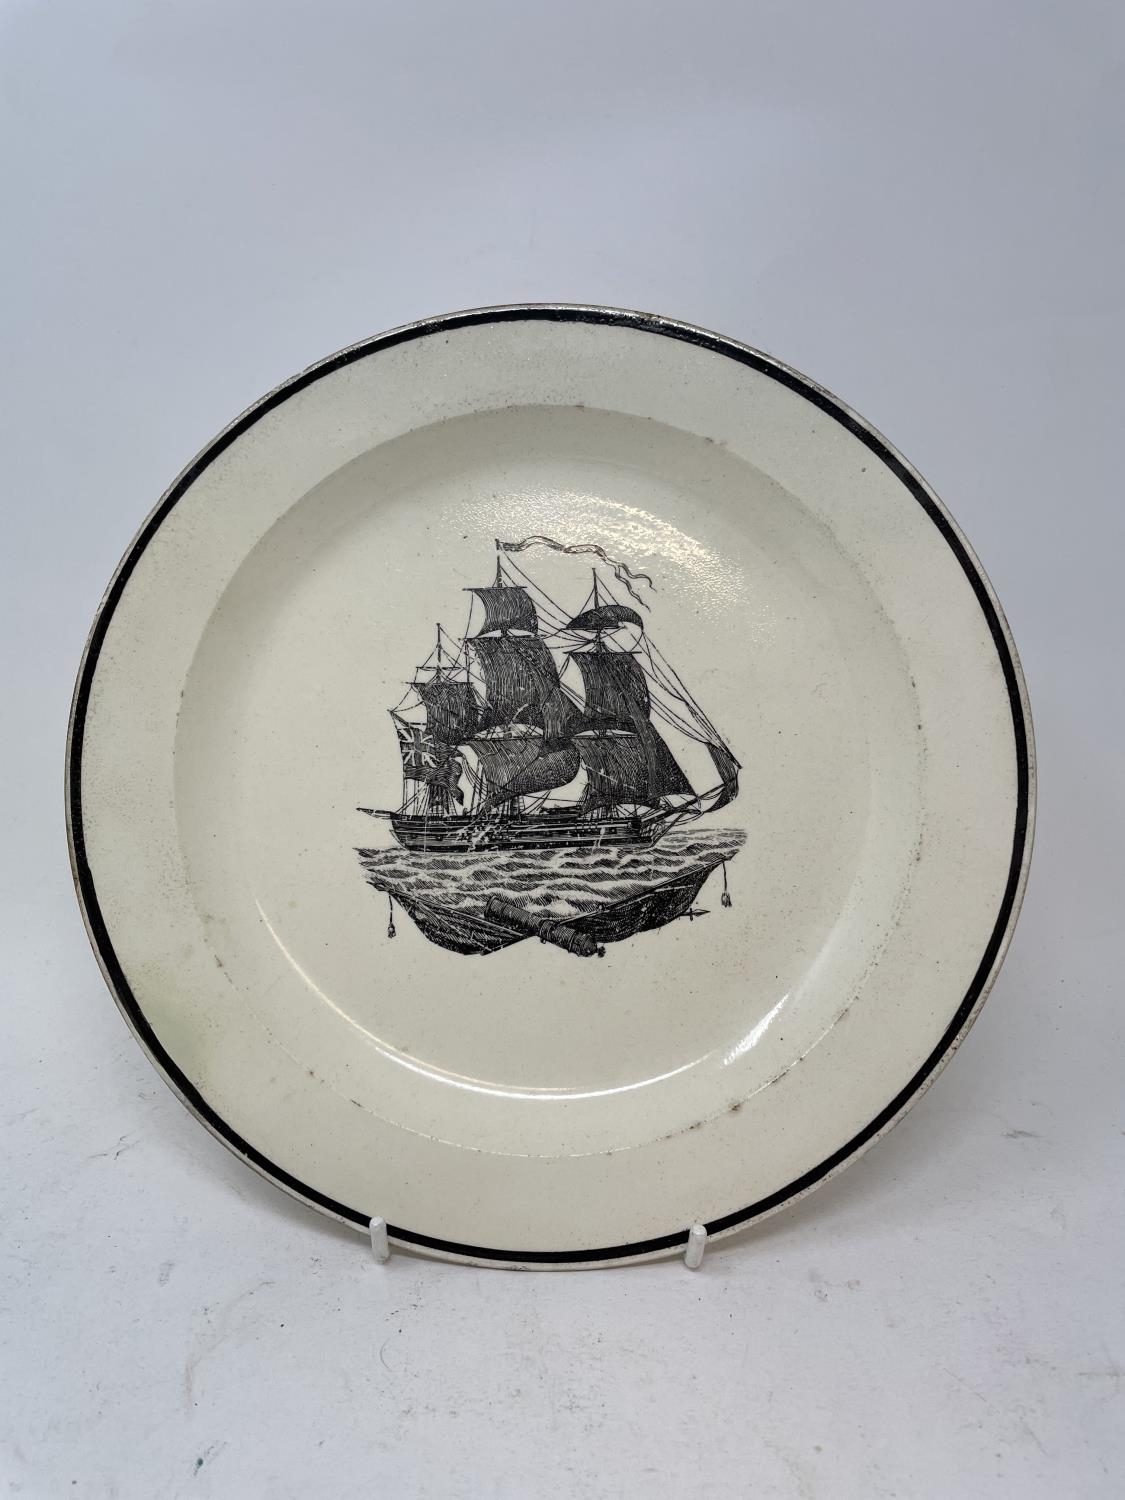 A 19th century creamware plate, bat-printed with a galleon, 25 cm diameter - Image 2 of 4